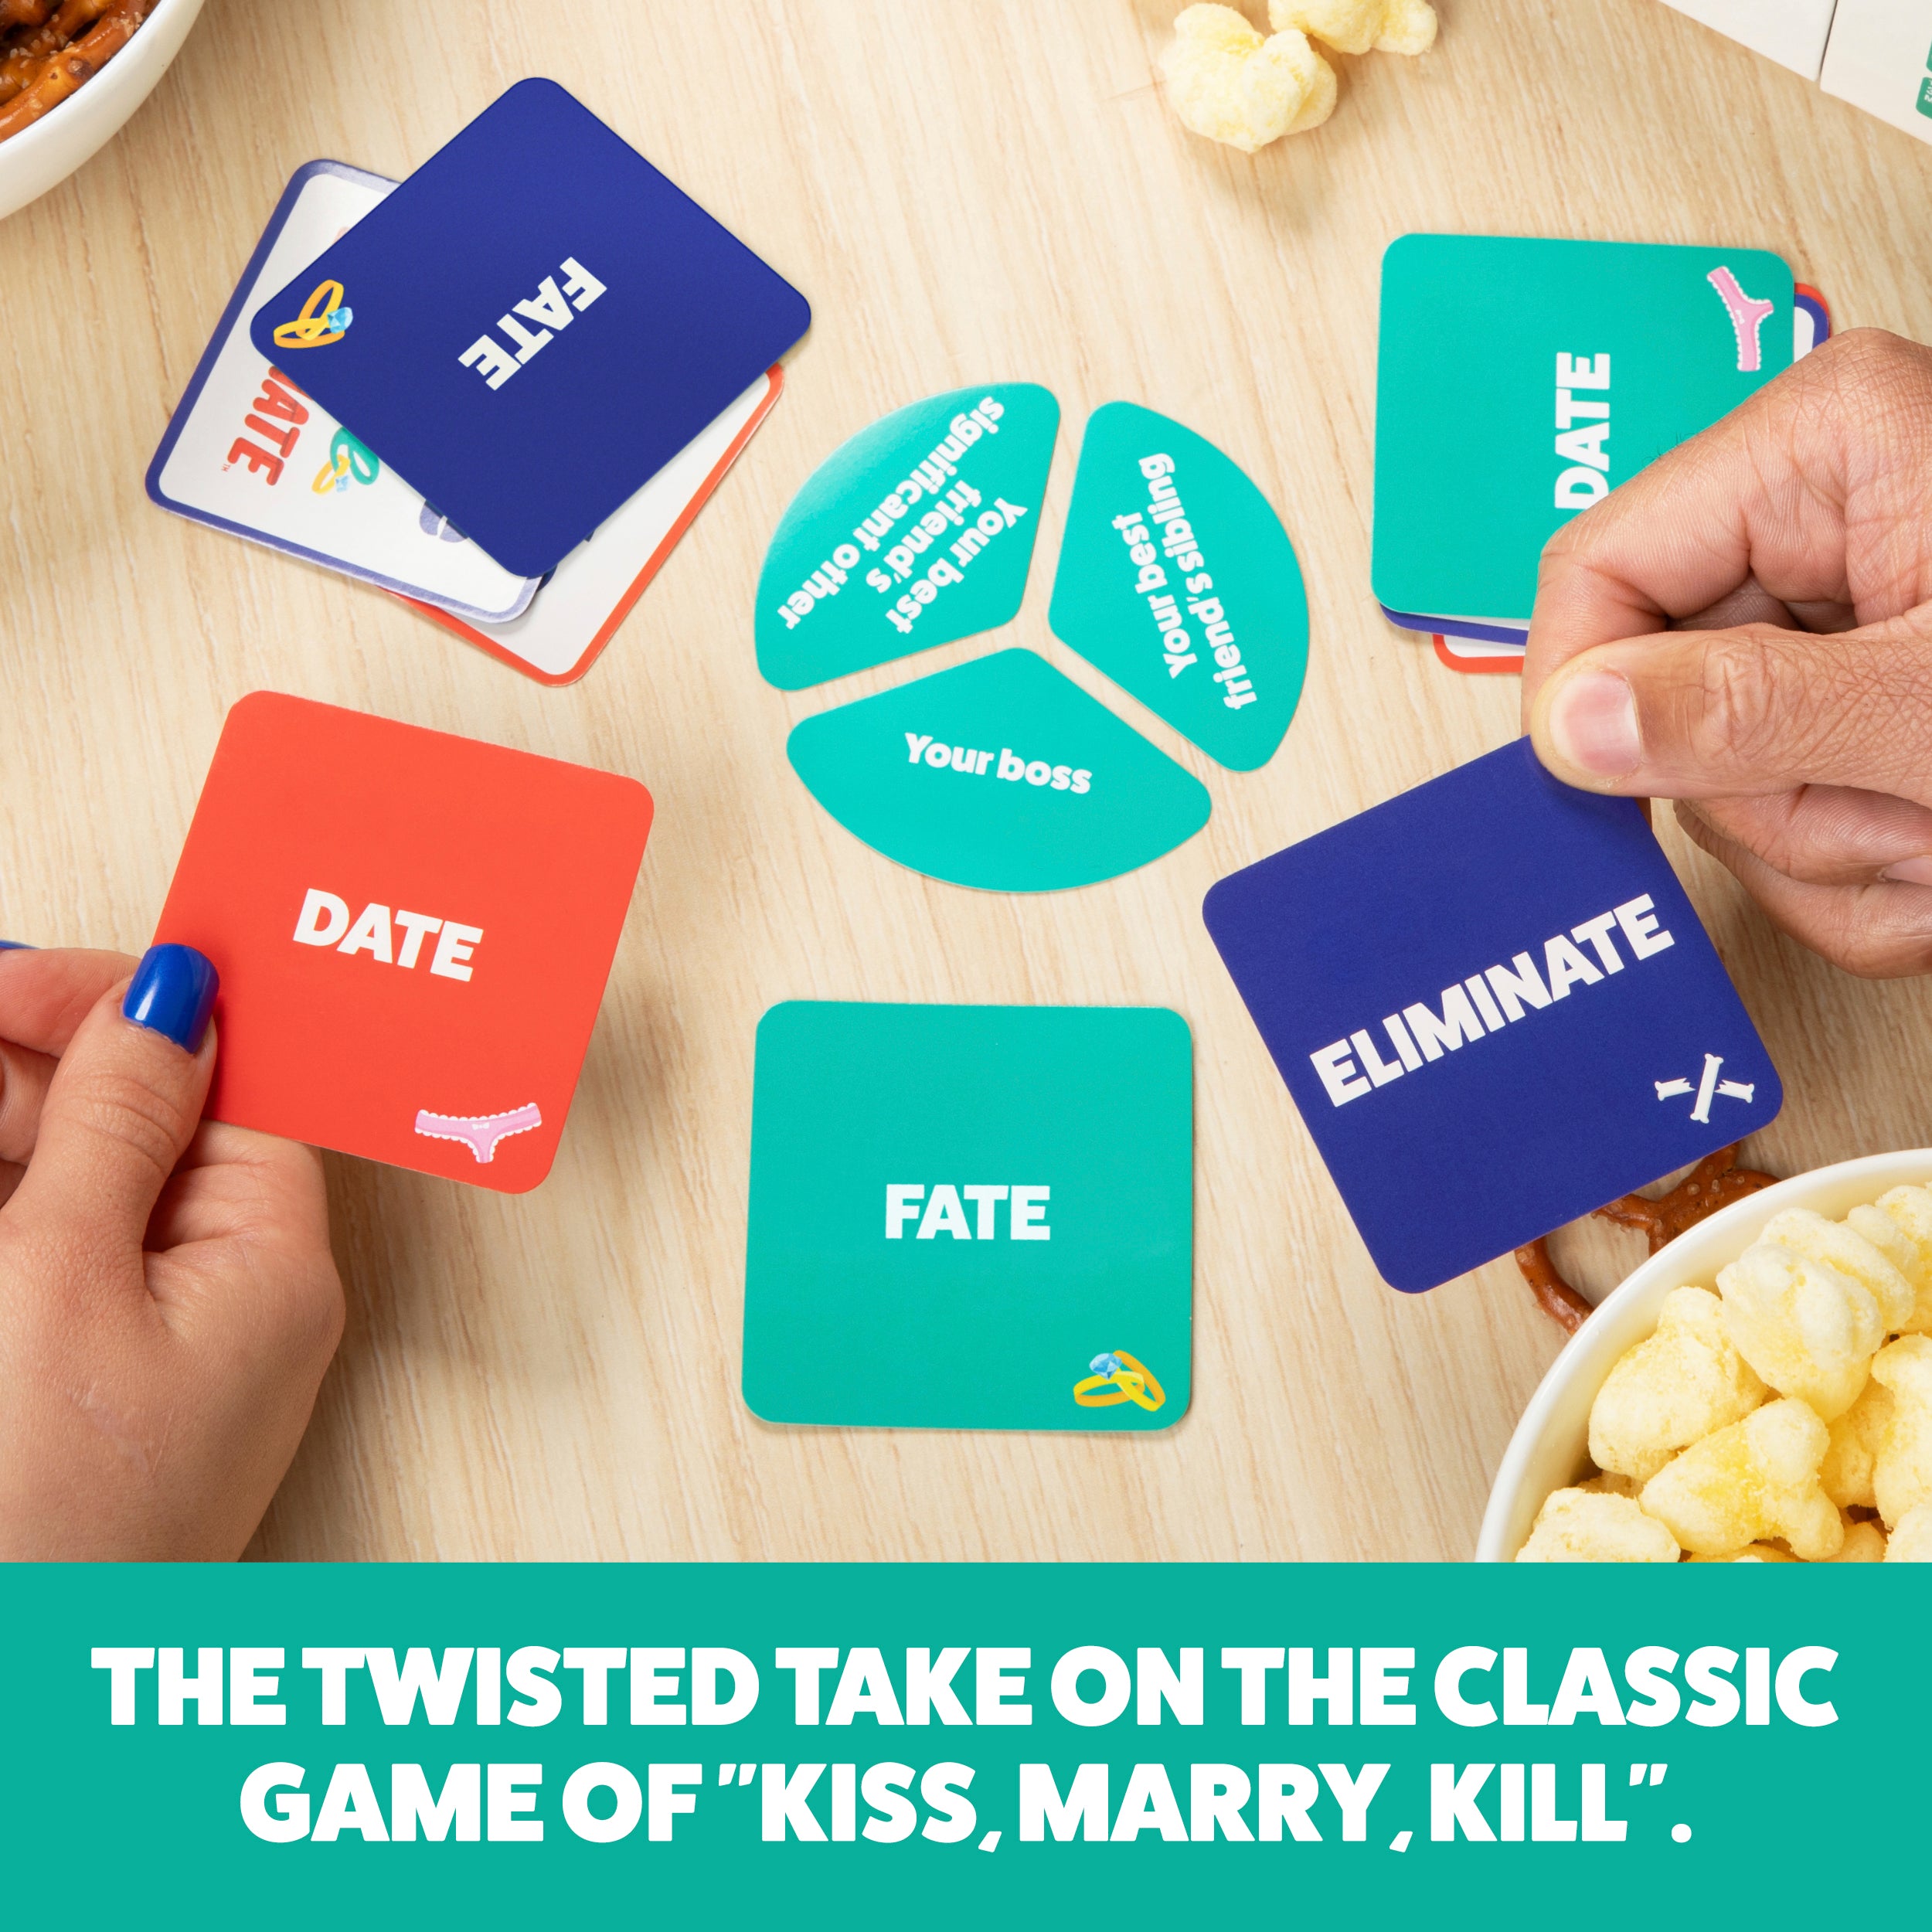 Date Fate Eliminate — The Card Game That Tests Your Taste by What Do You Meme?®